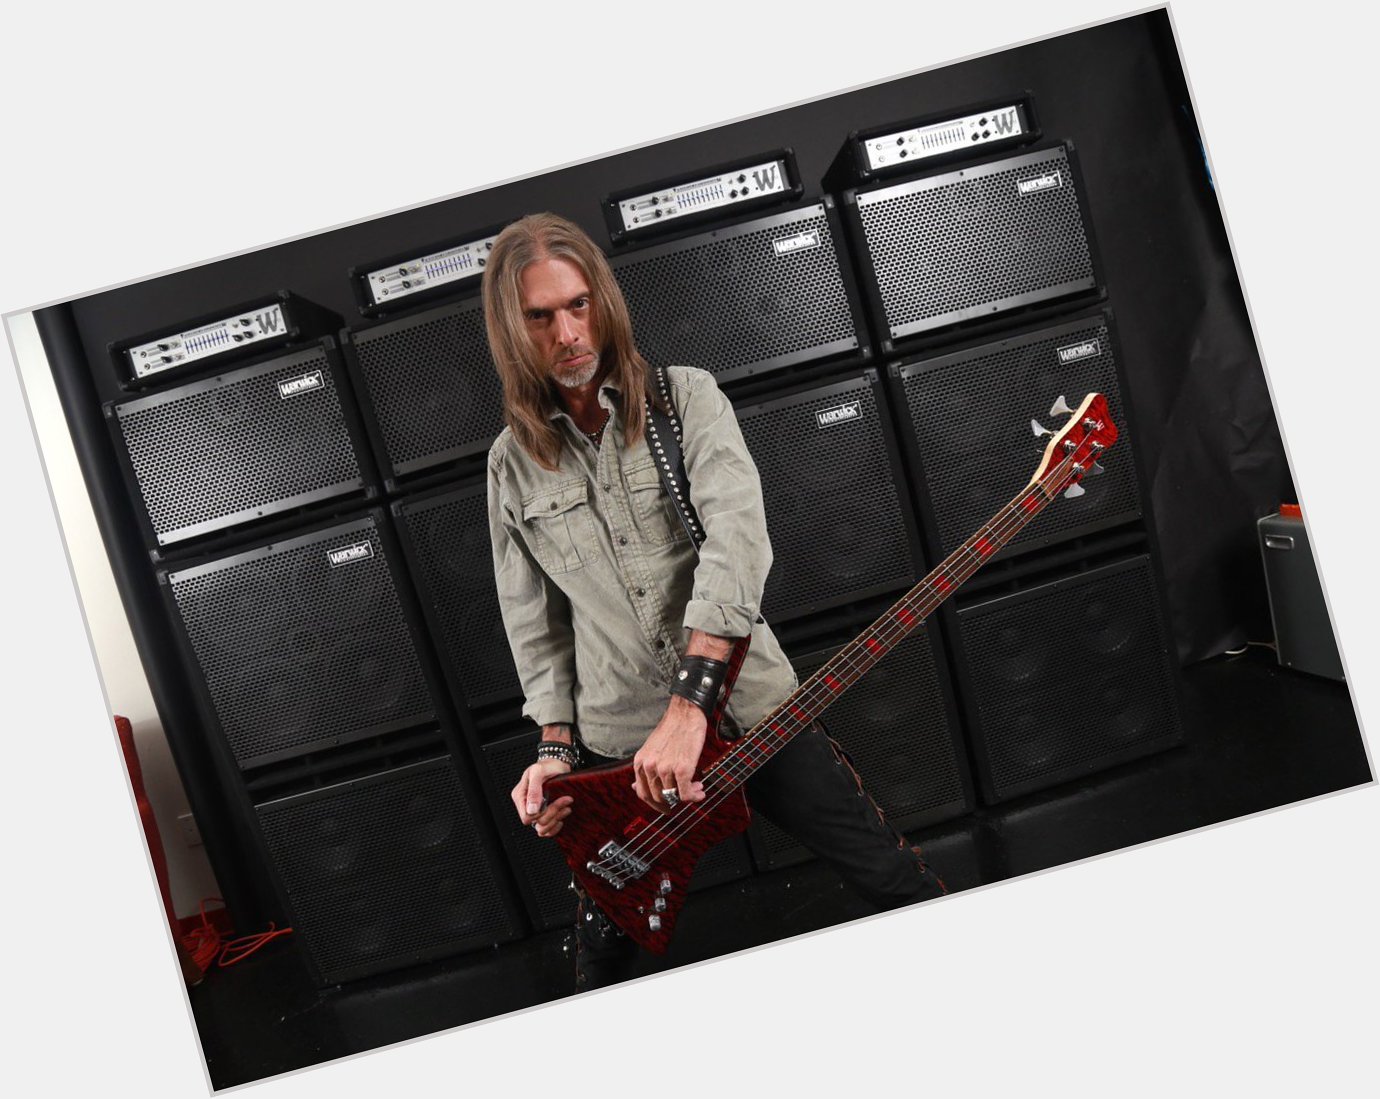 A very HAPPY BIRTHDAY to the one and only REX BROWN!       